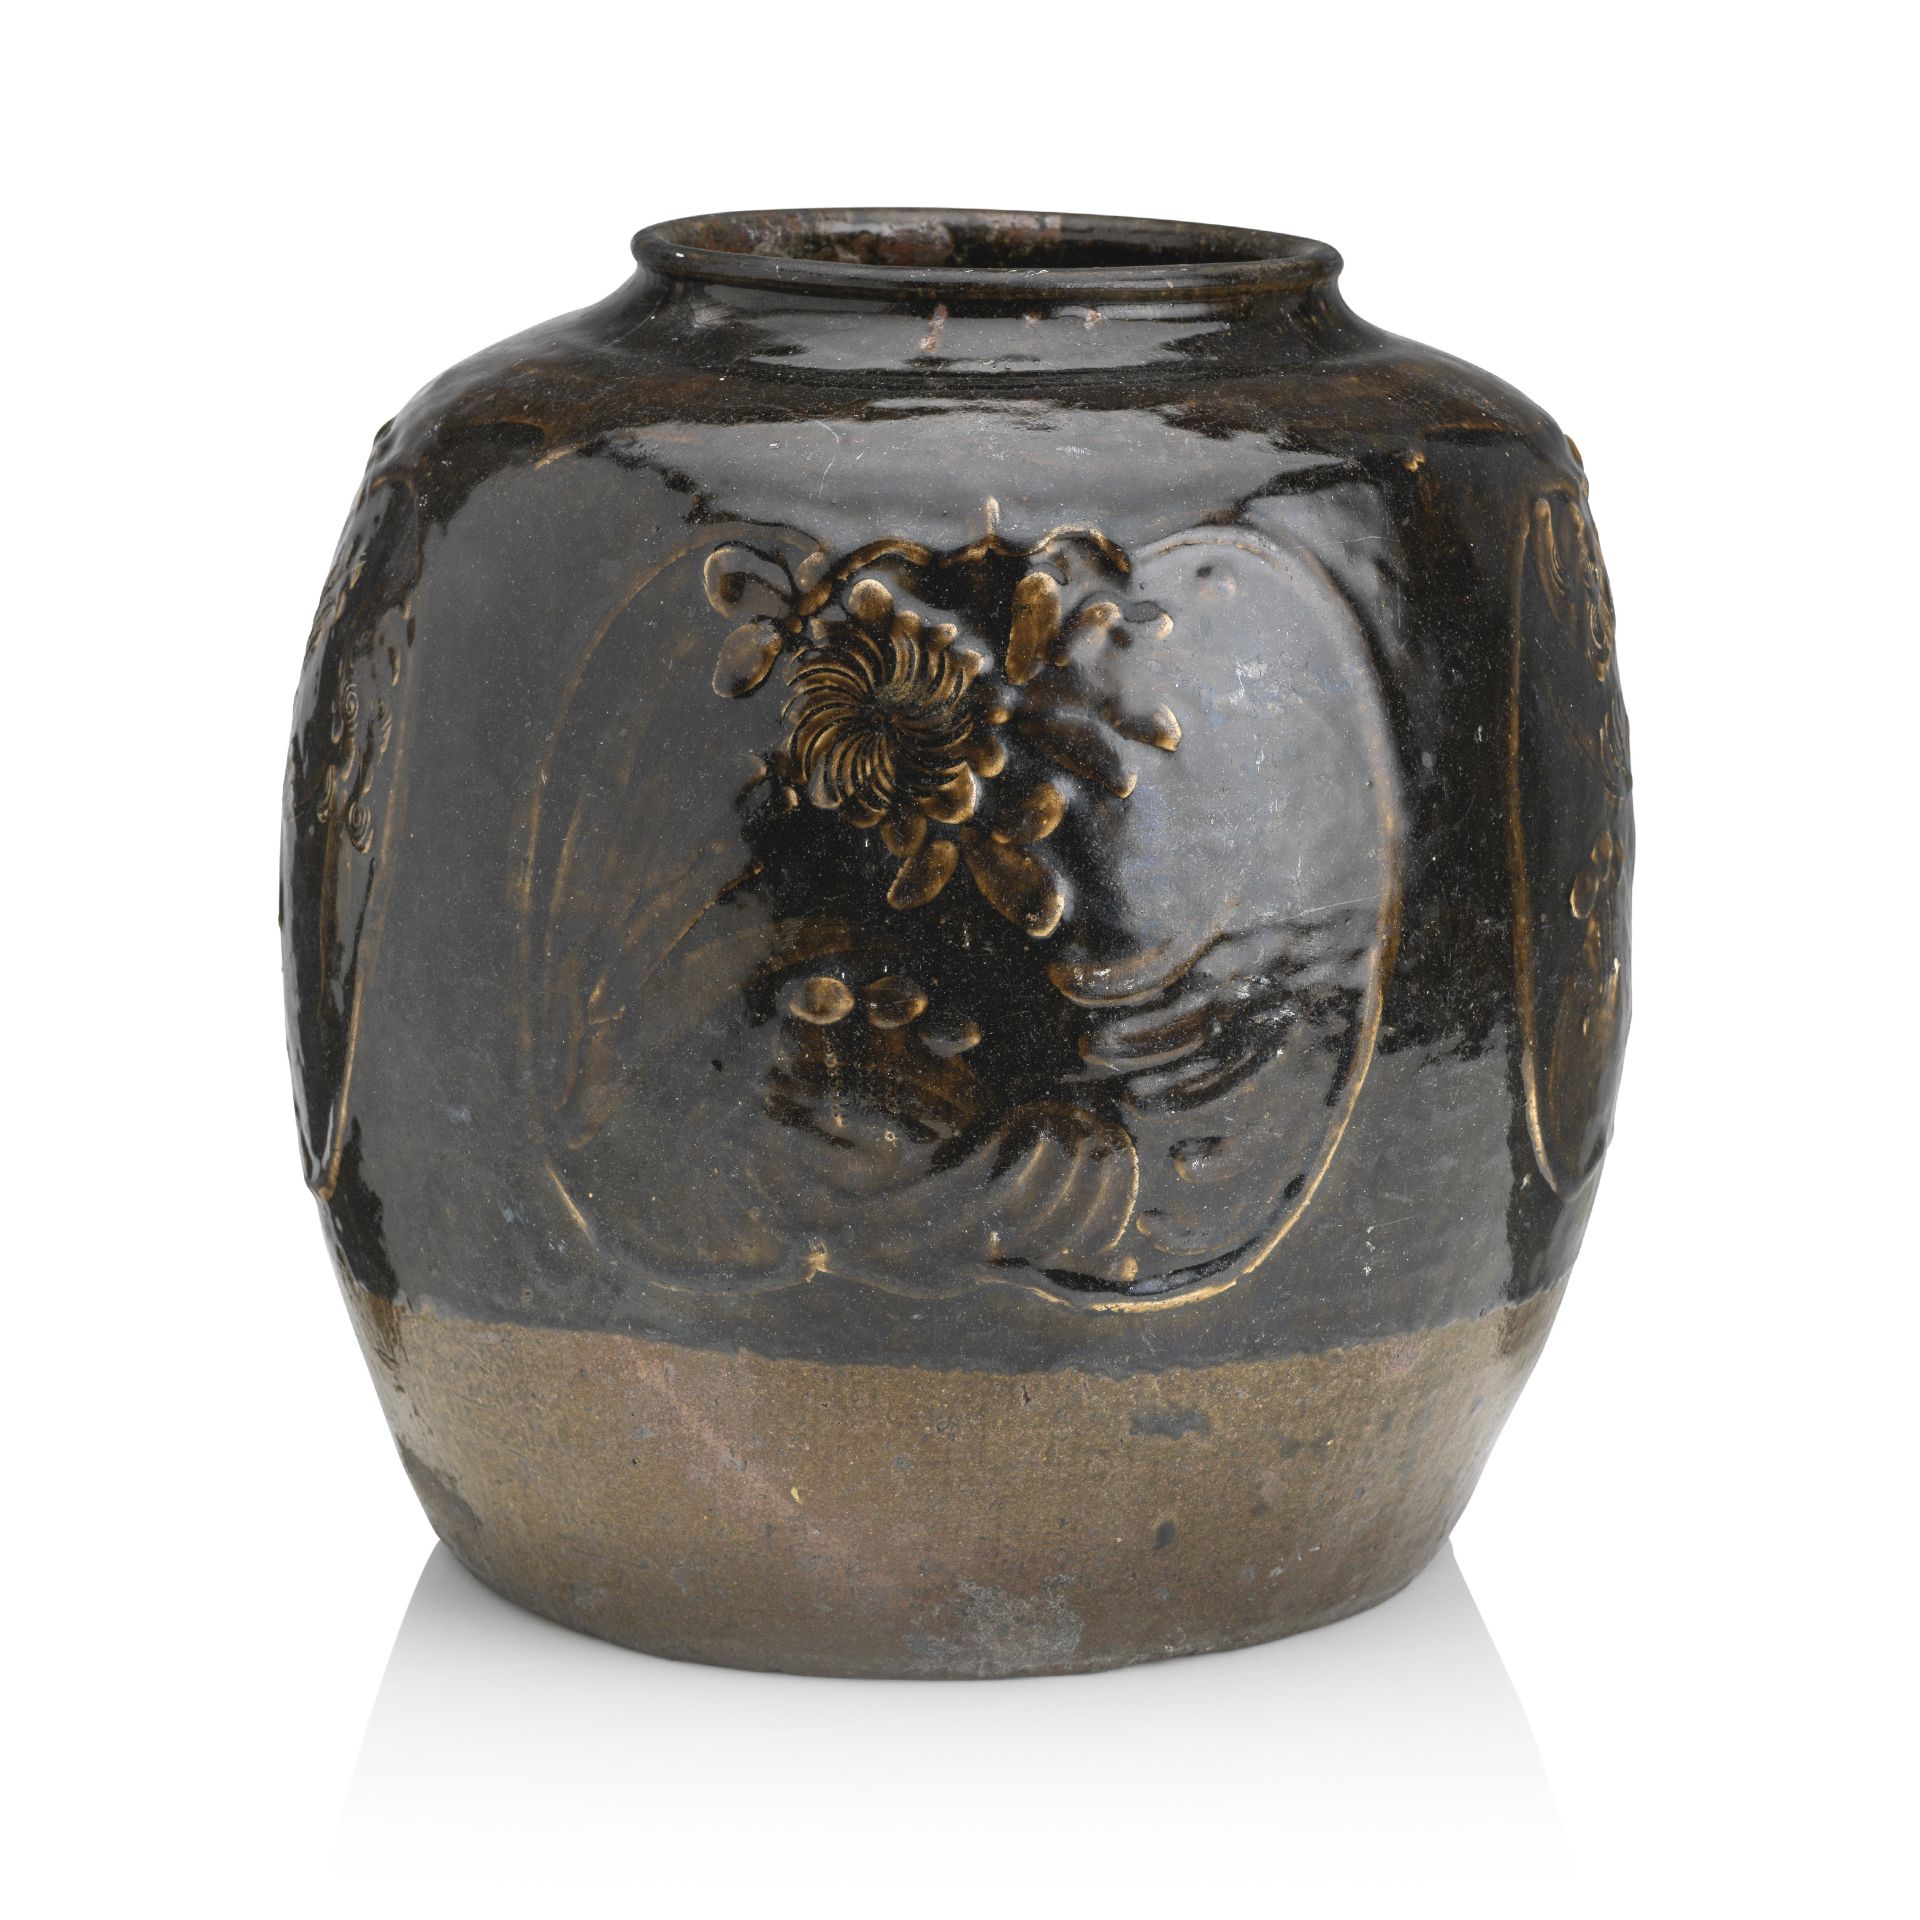 A LARGE CHINESE 19TH CENTURY BROWN GLAZED STONEWARE JAR